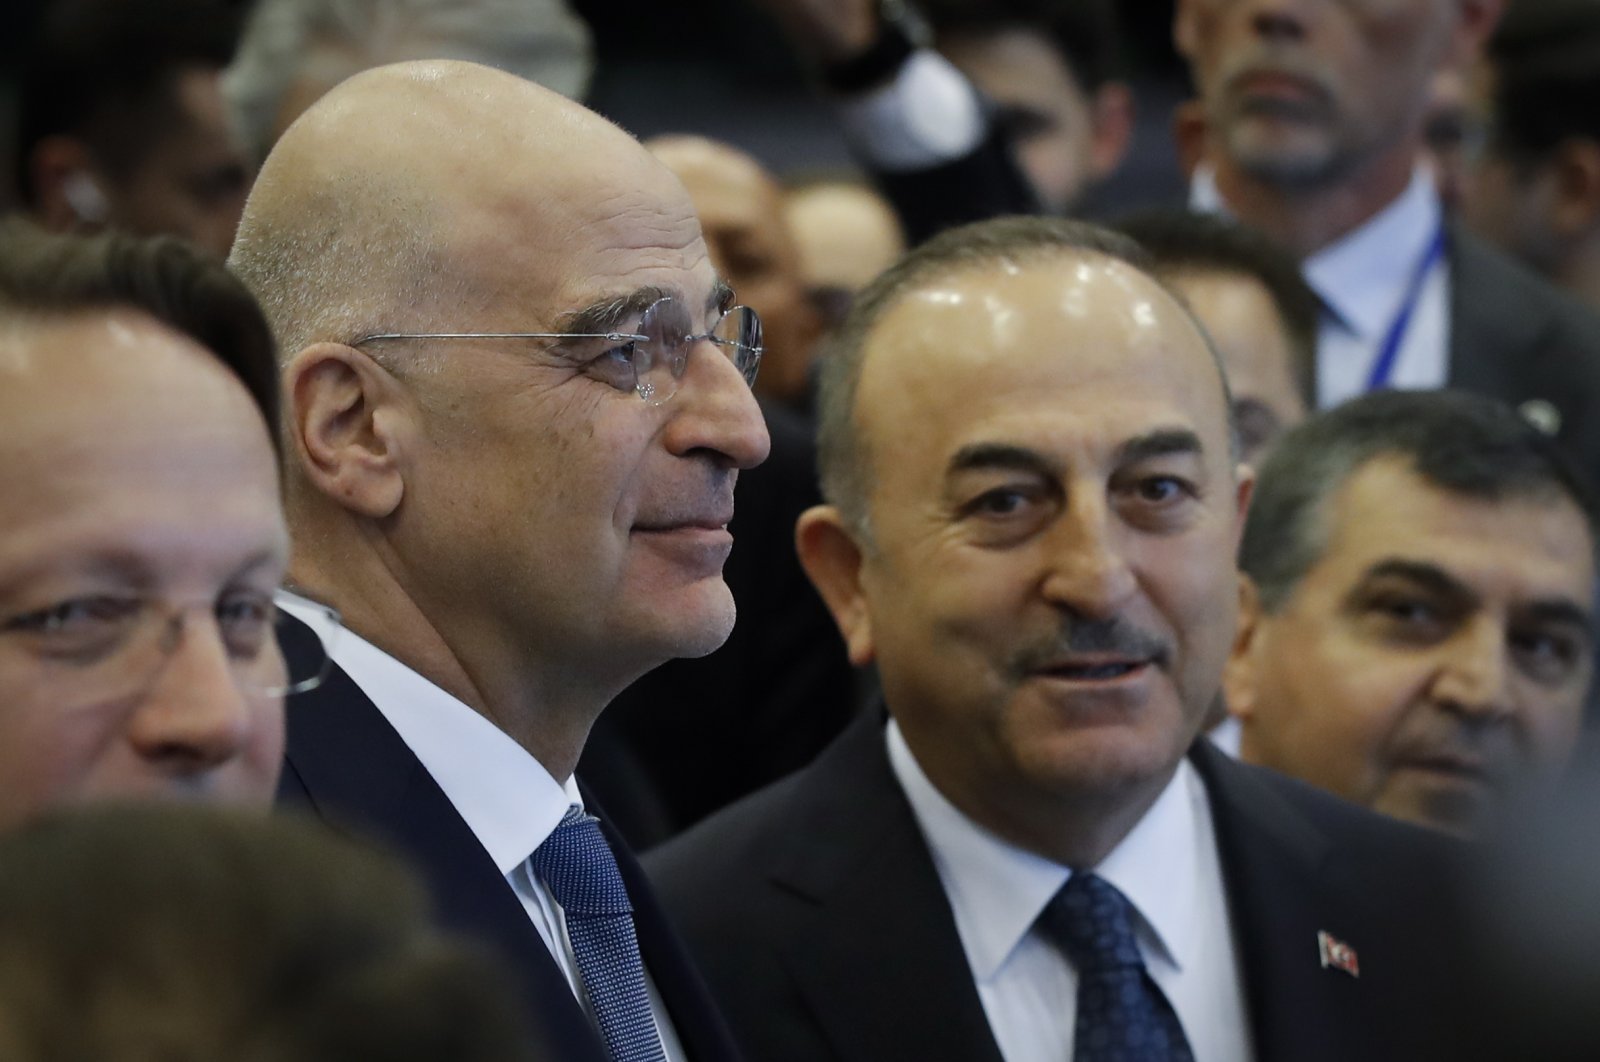 Greek Foreign Minister Nikos Dendias (L) and Foreign Minister Mevlüt Çavuşoğlu attend the international donors conference, in Brussels, Belgium, March 20, 2023. (EPA Photo)